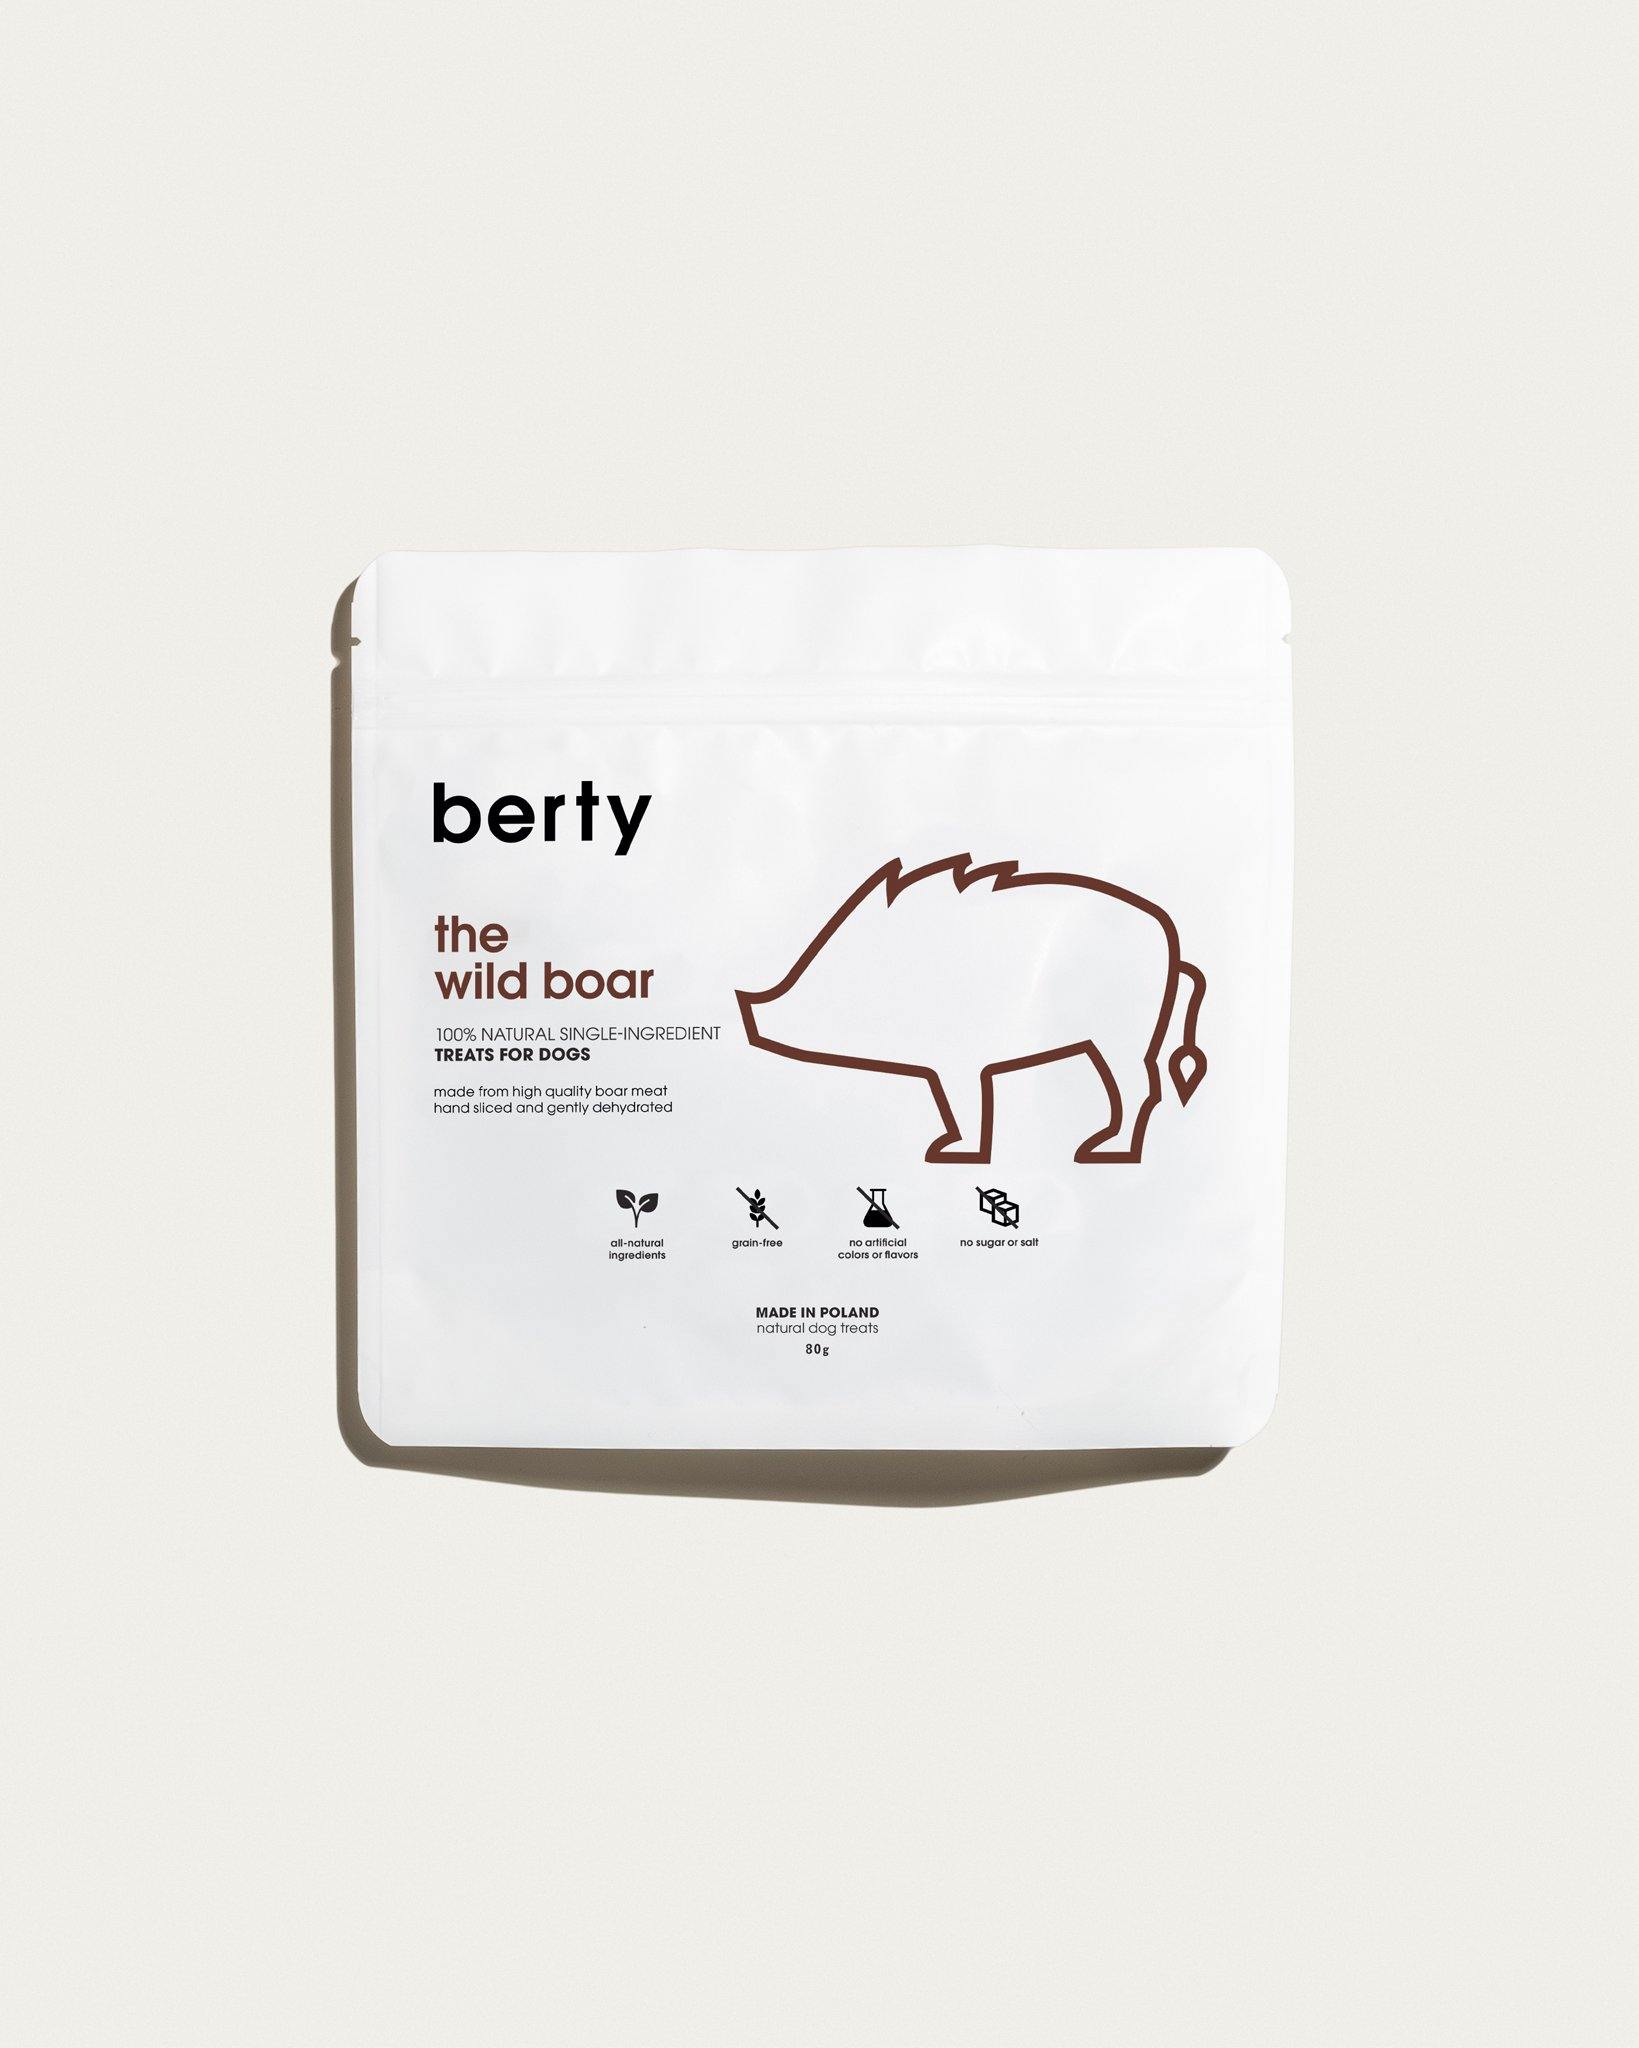 the wild boar - treats for dogs - berty